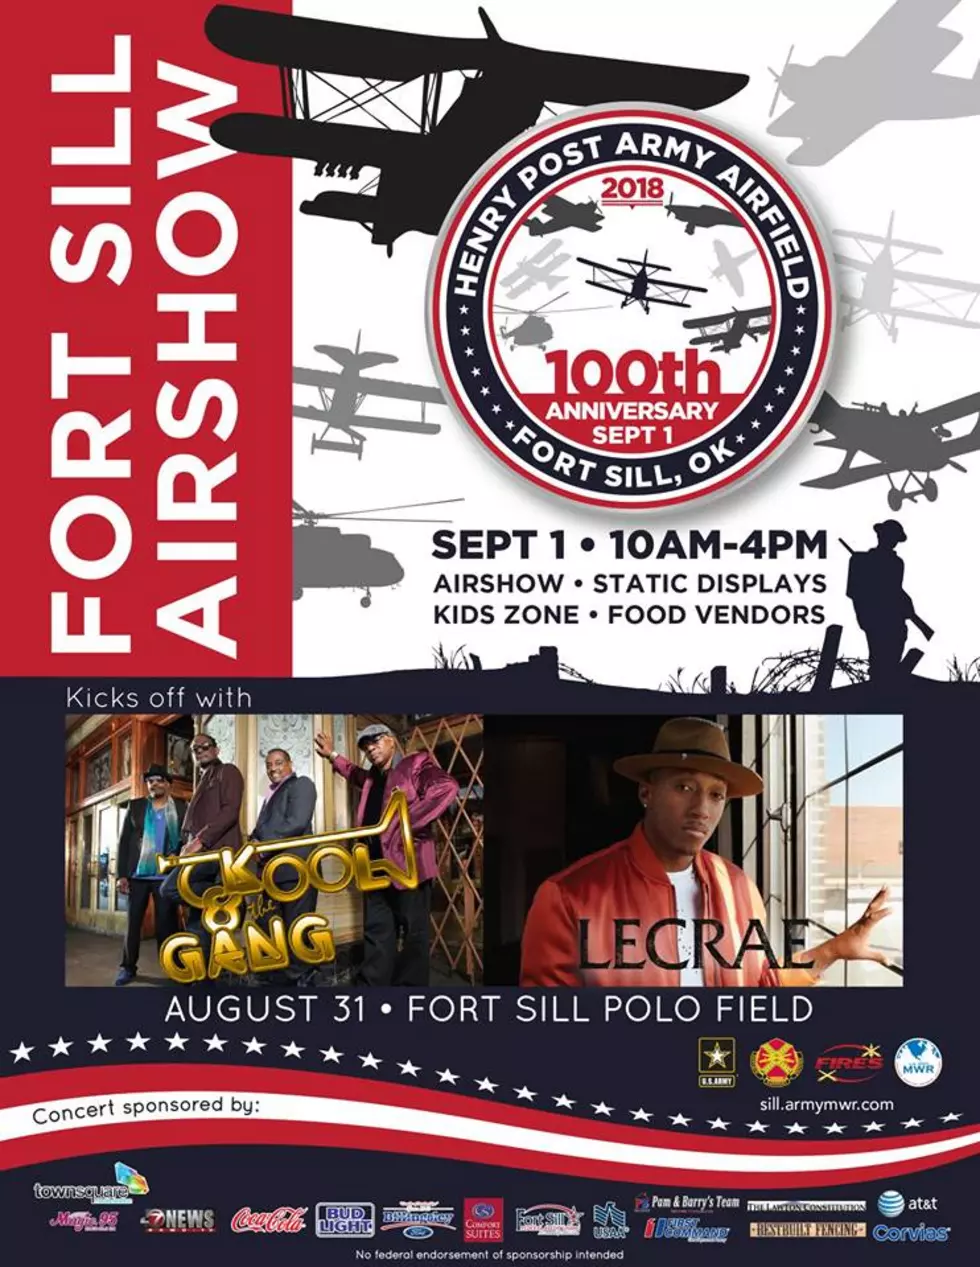 The Henry Post Army Airfield 100th Anniversary Celebration